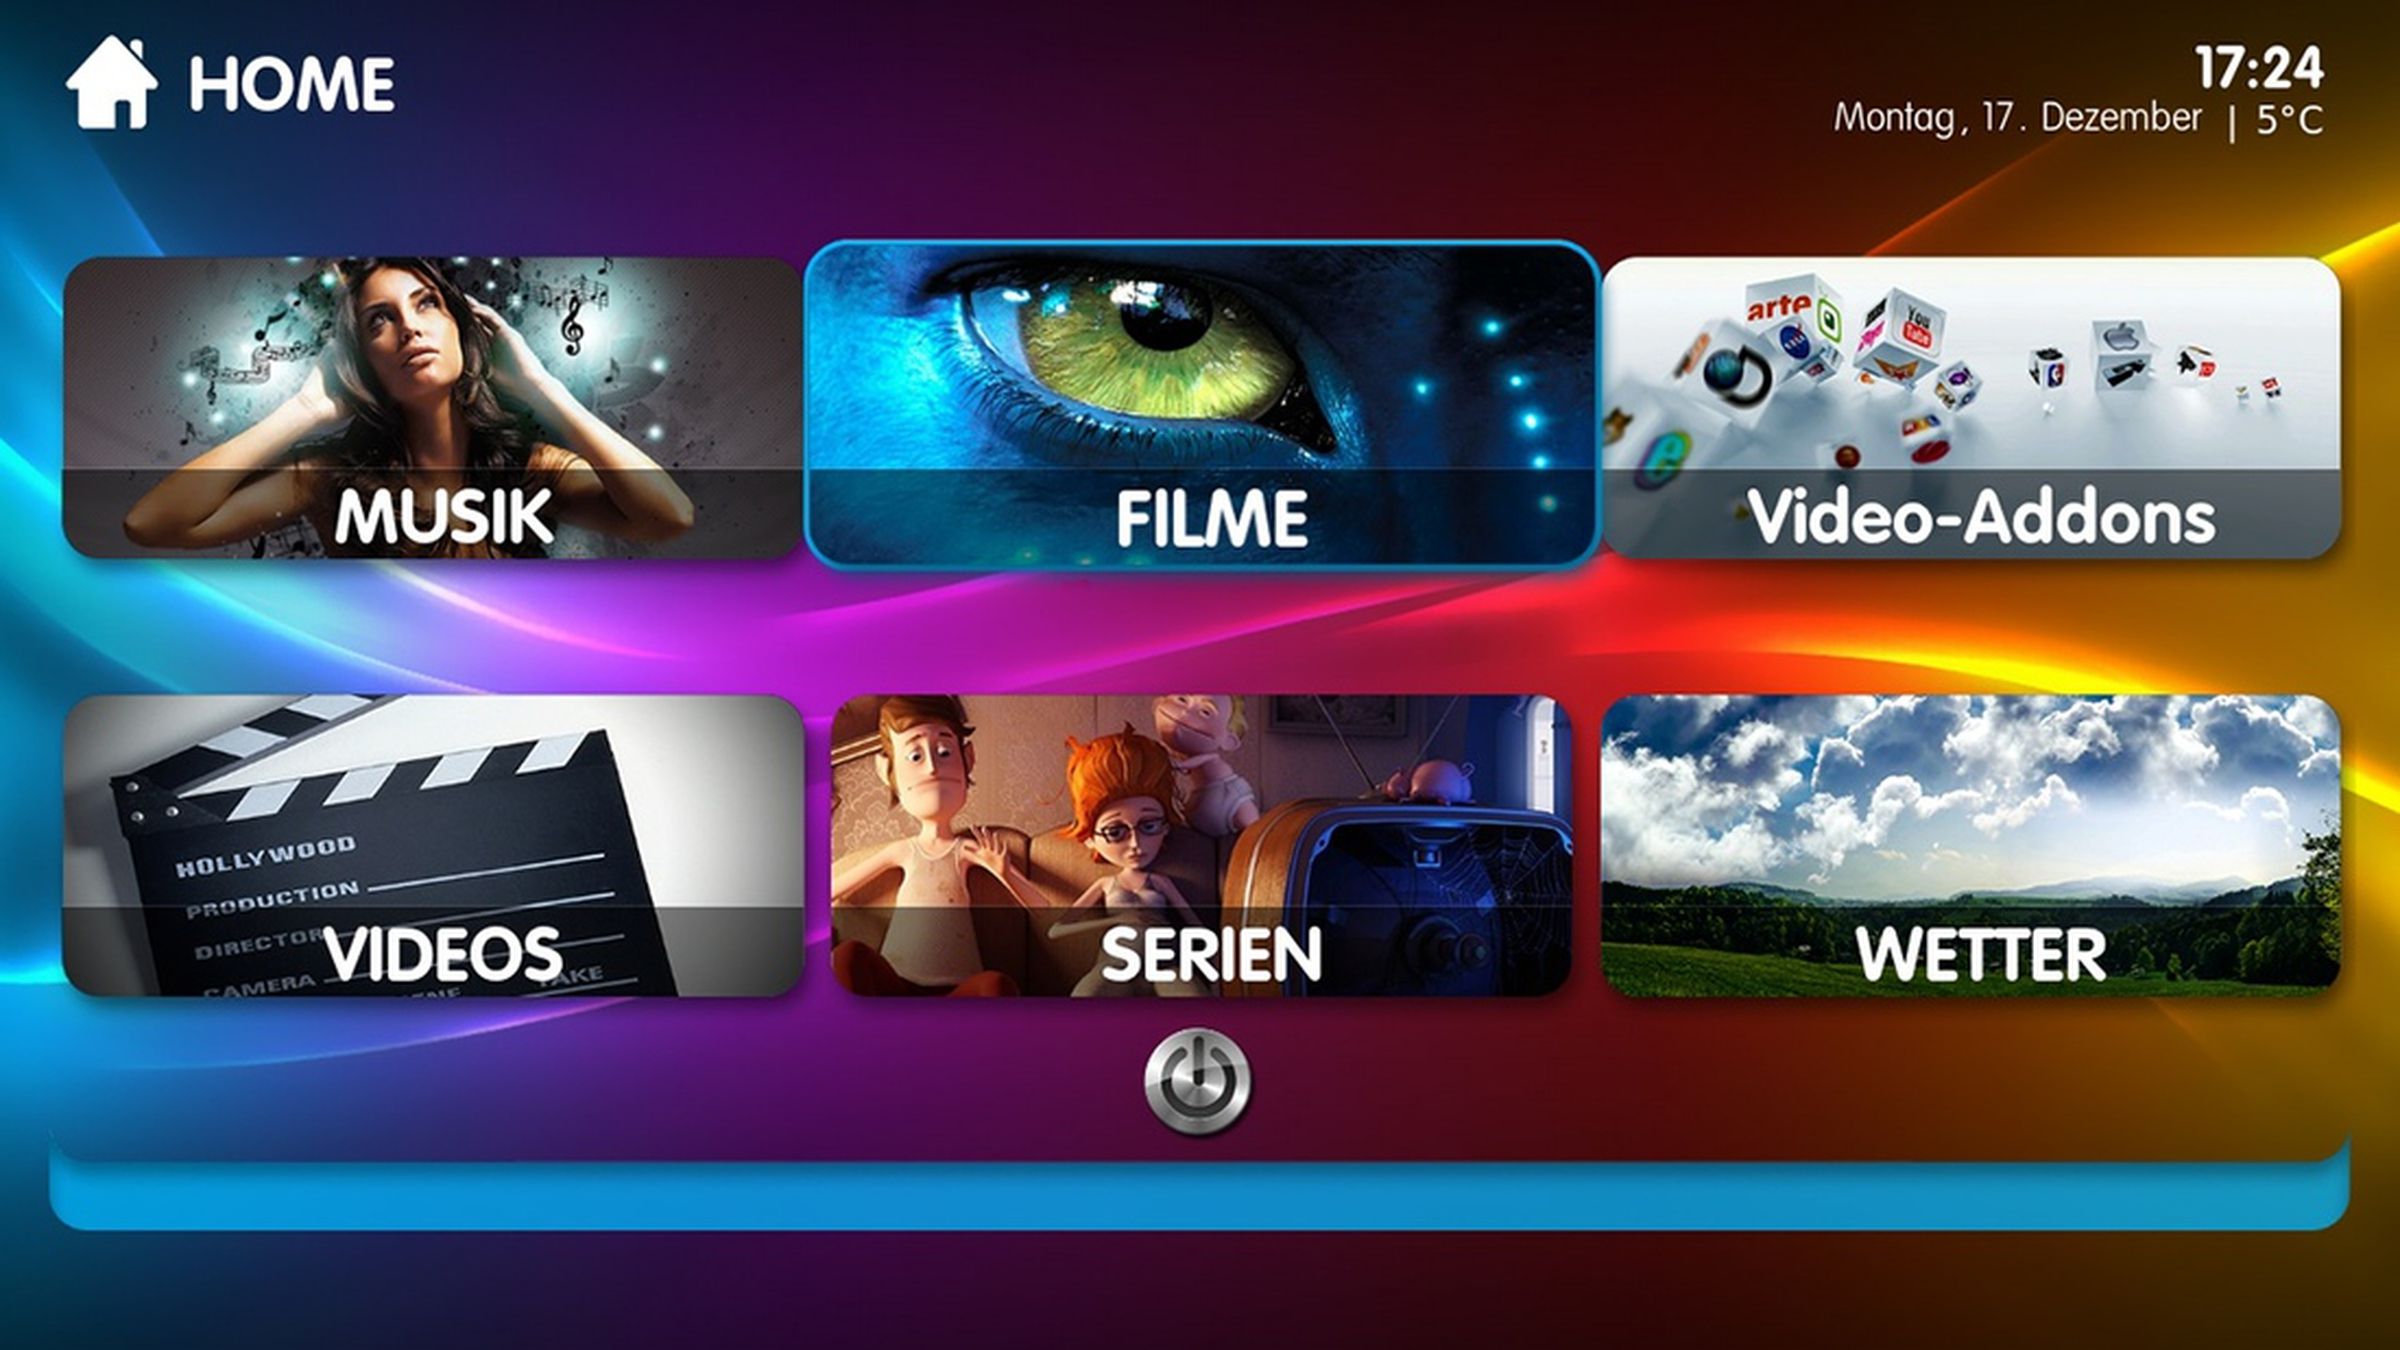 XBMC 12 'Frodo' interface pictures